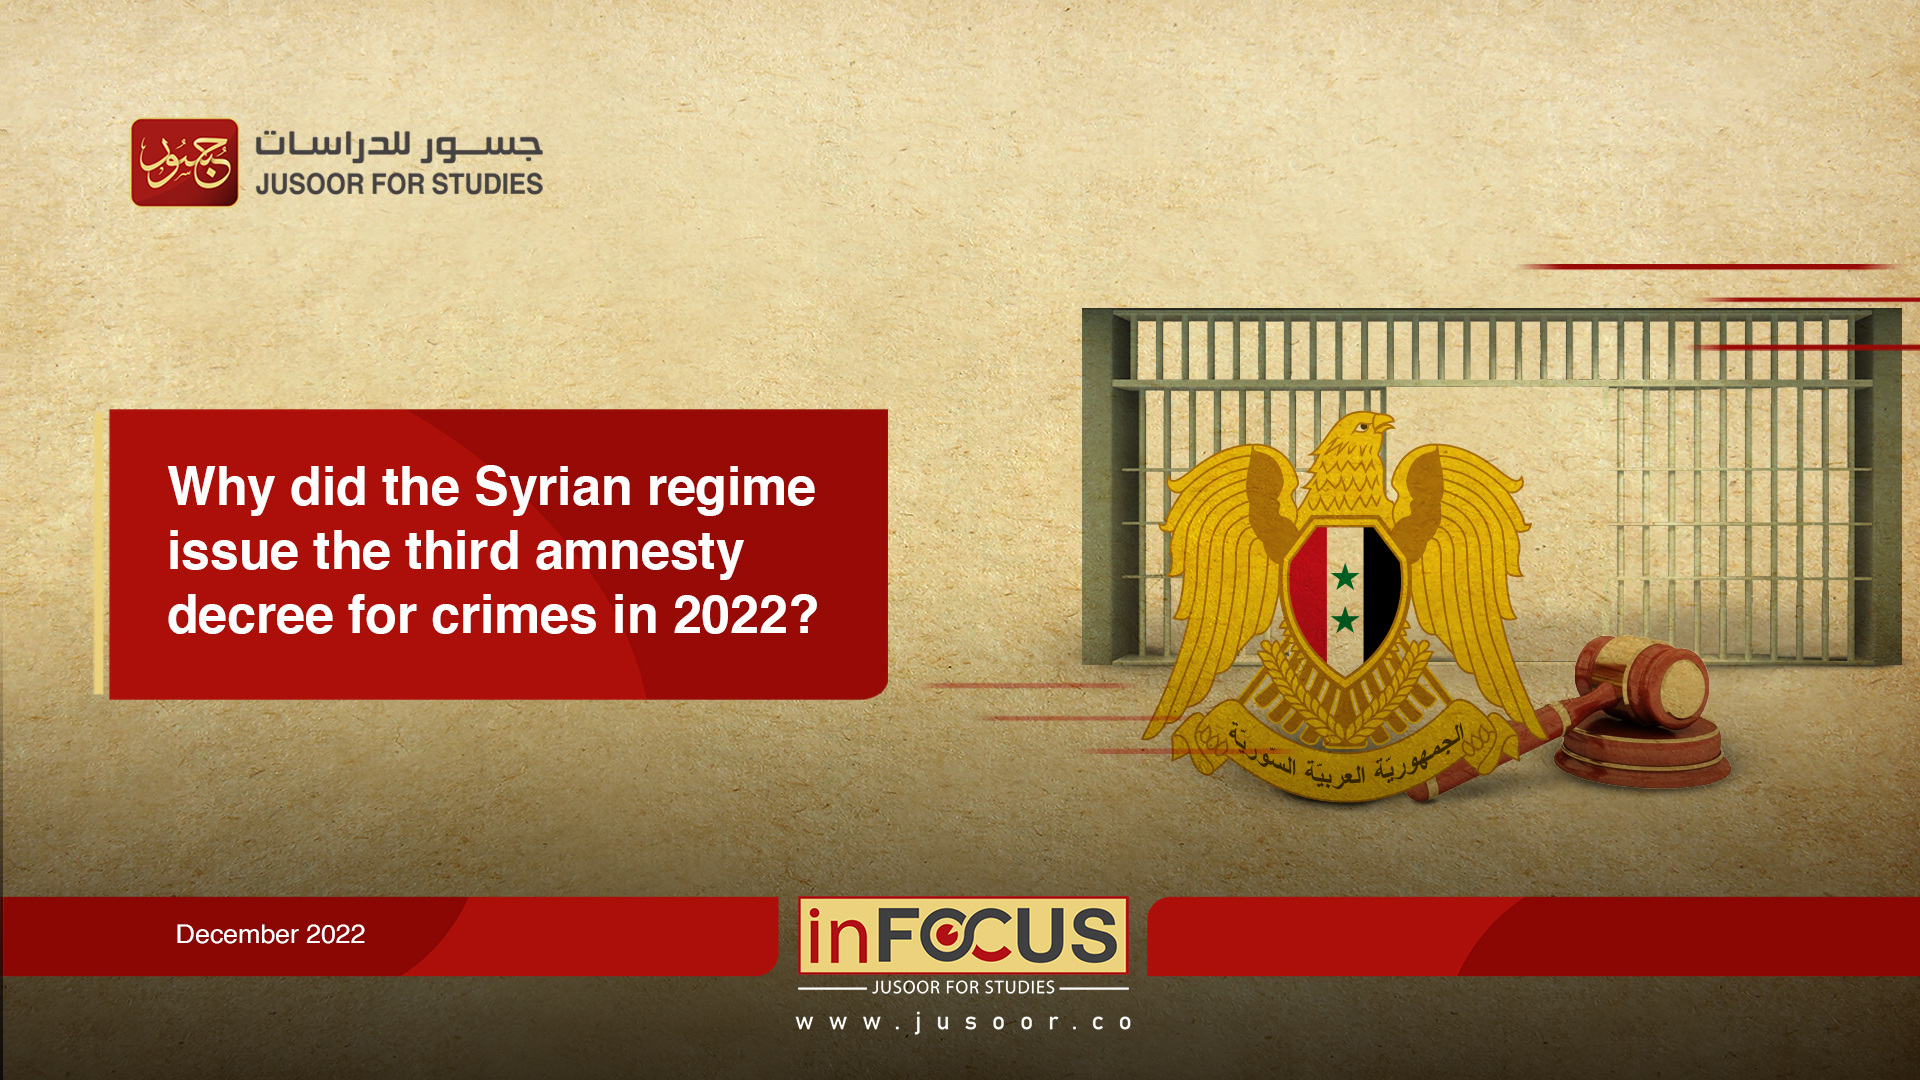 Why did the Syrian regime issue the third amnesty decree for crimes in 2022?